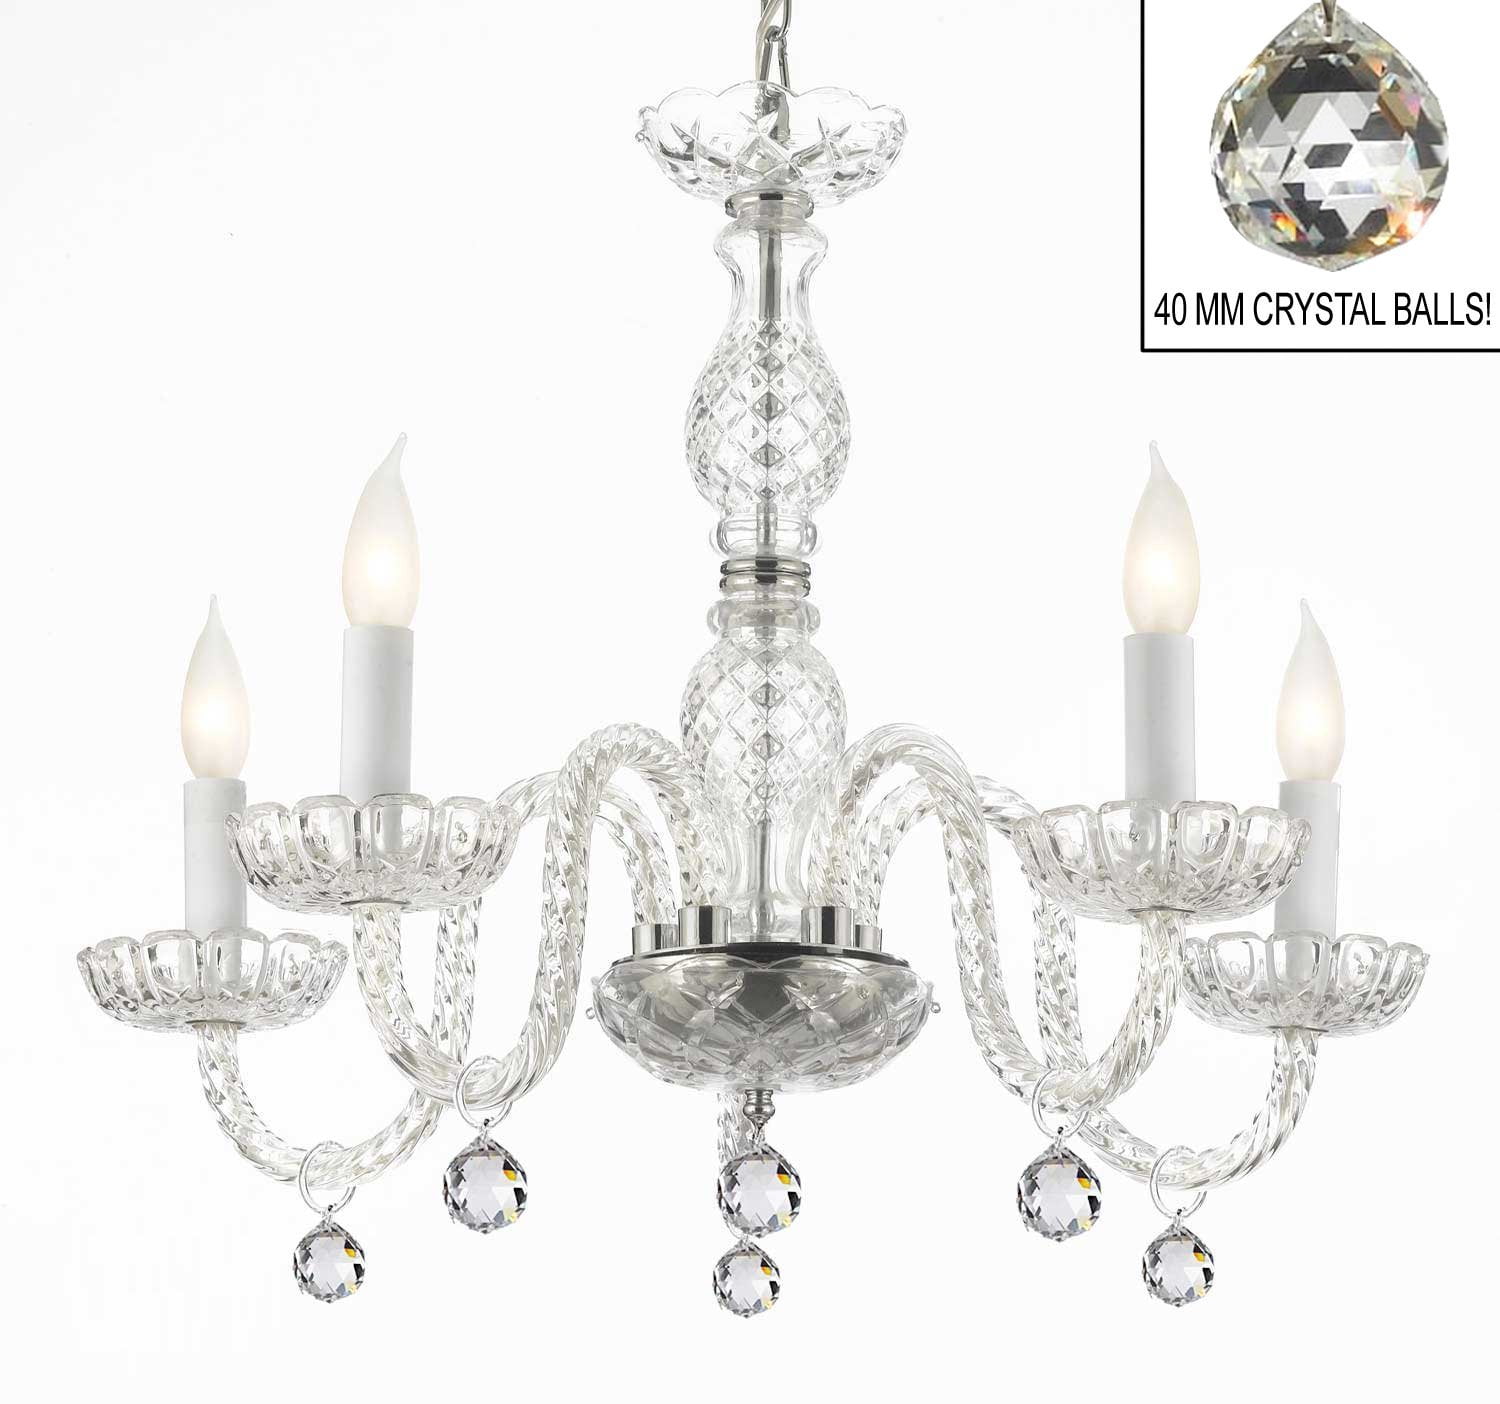 Authentic All Crystal Chandelier Chandeliers Lighting W/ 40mm Crystal Balls! 